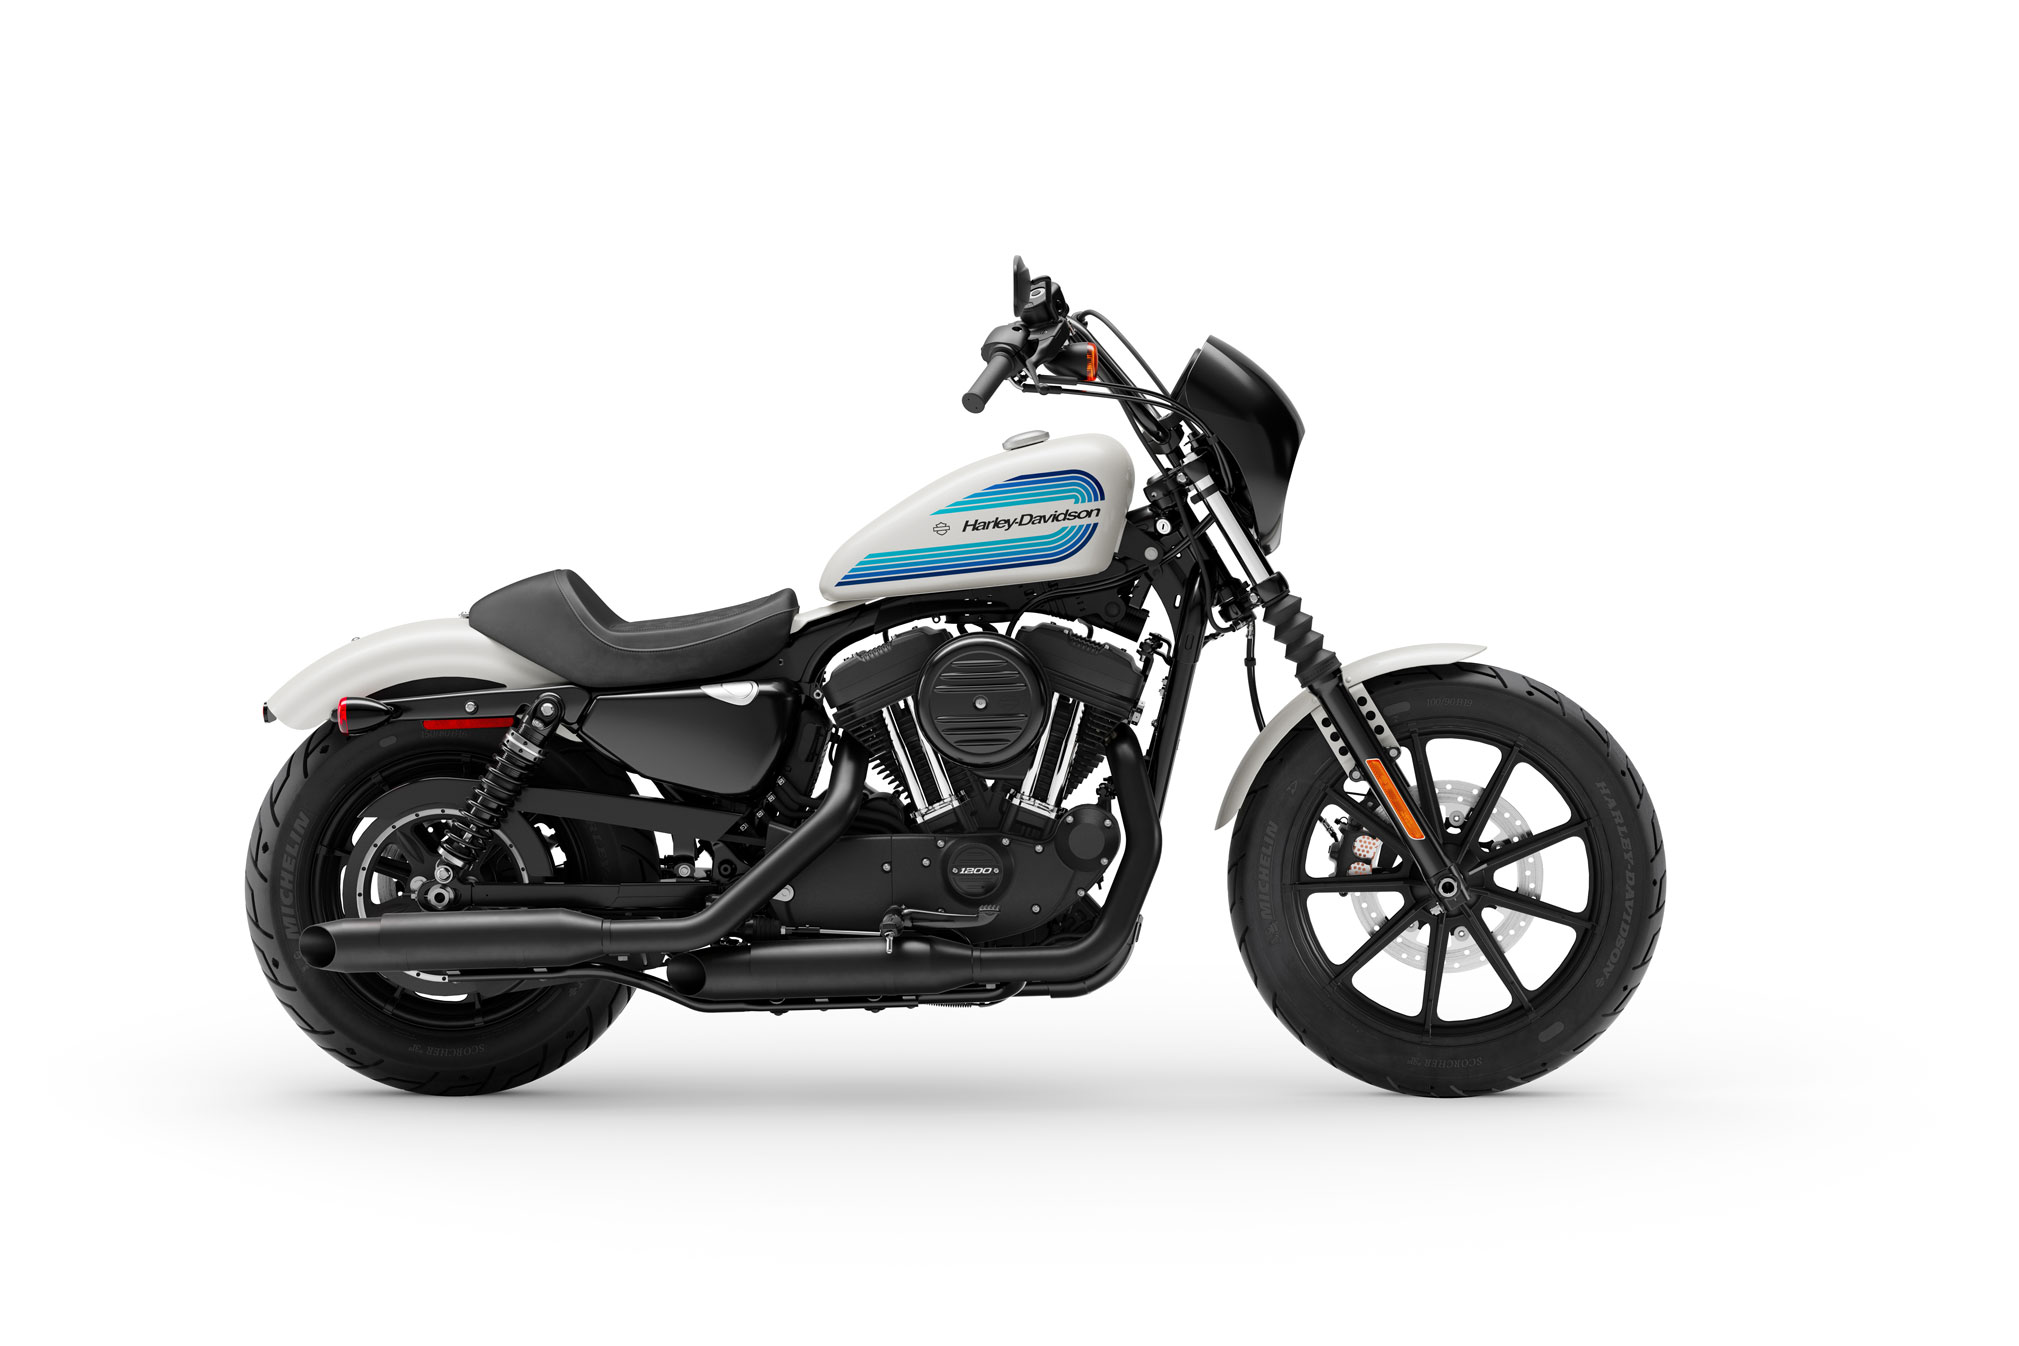 2020 Harley Davidson Iron 1200 Buyer S Guide Specs Prices